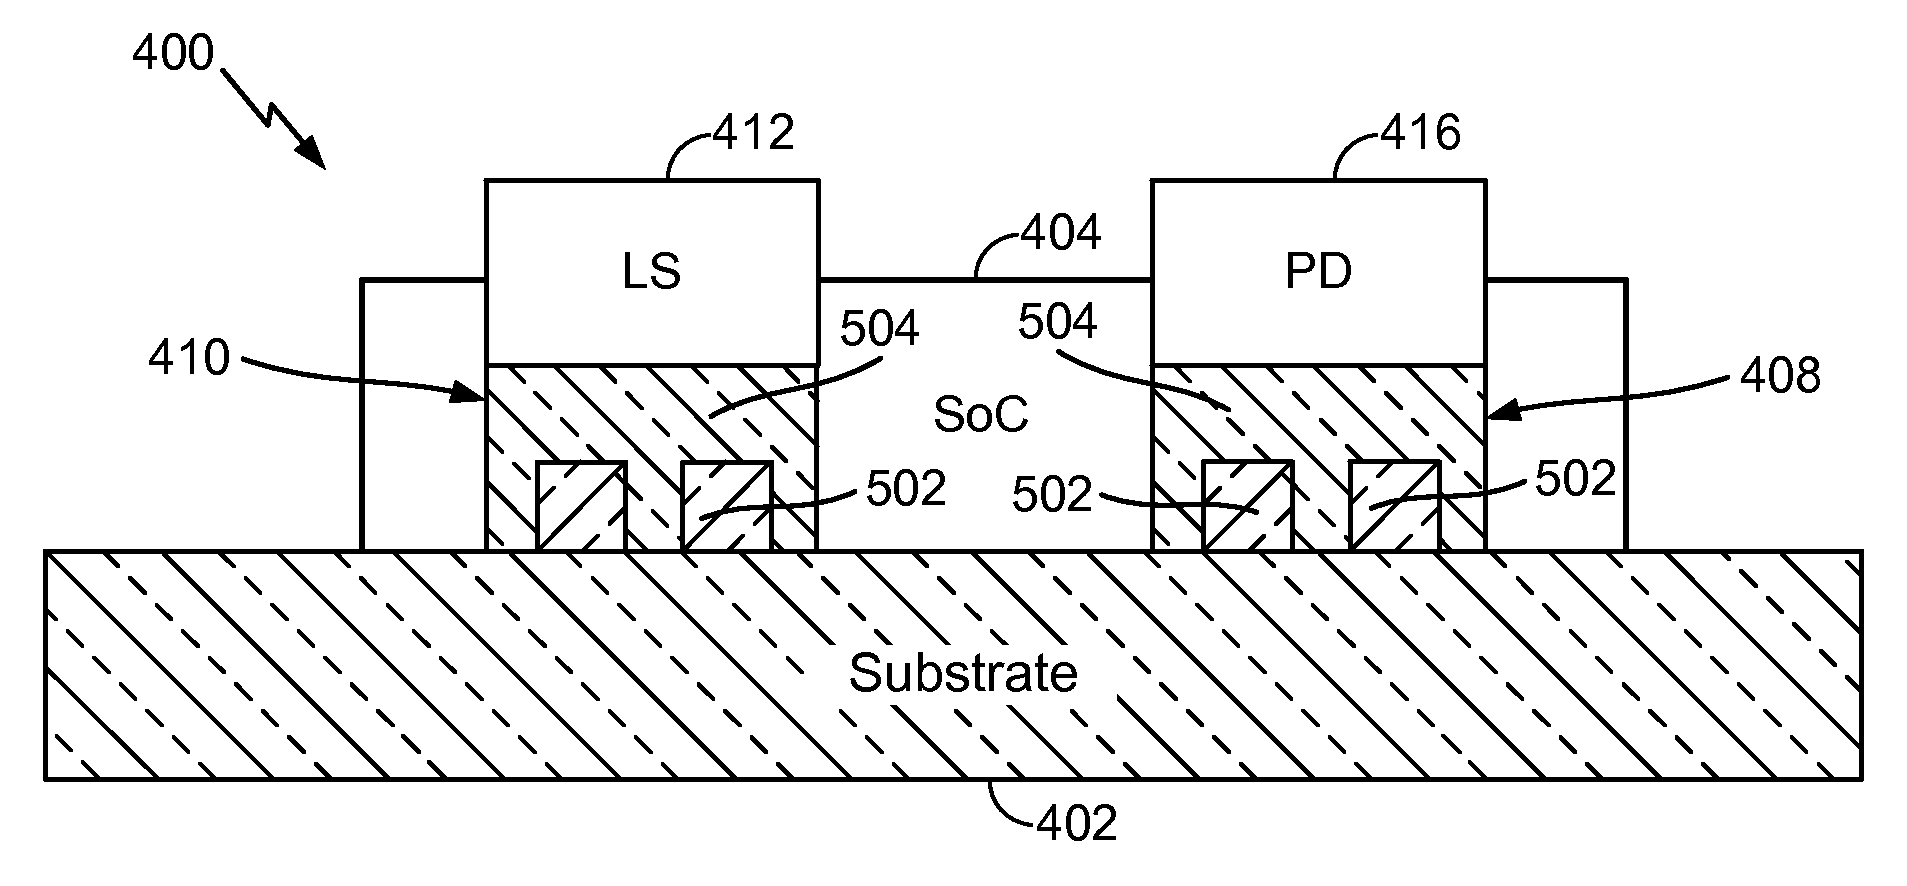 Electro-optical transceiver device to enable chip-to-chip interconnection